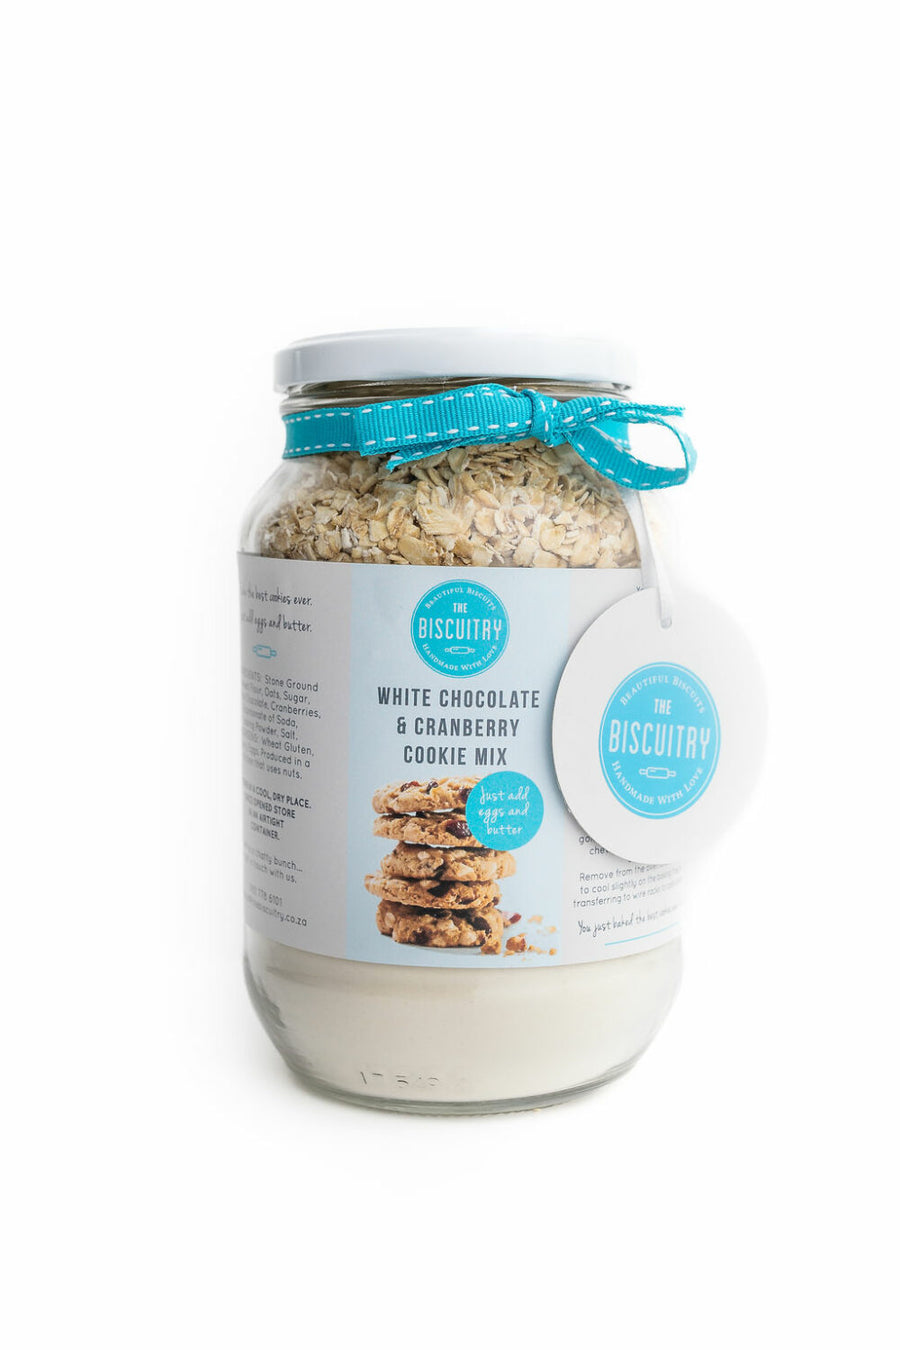 The Biscuitry - White Chocolate & Cranberry Cookie Mix Jar